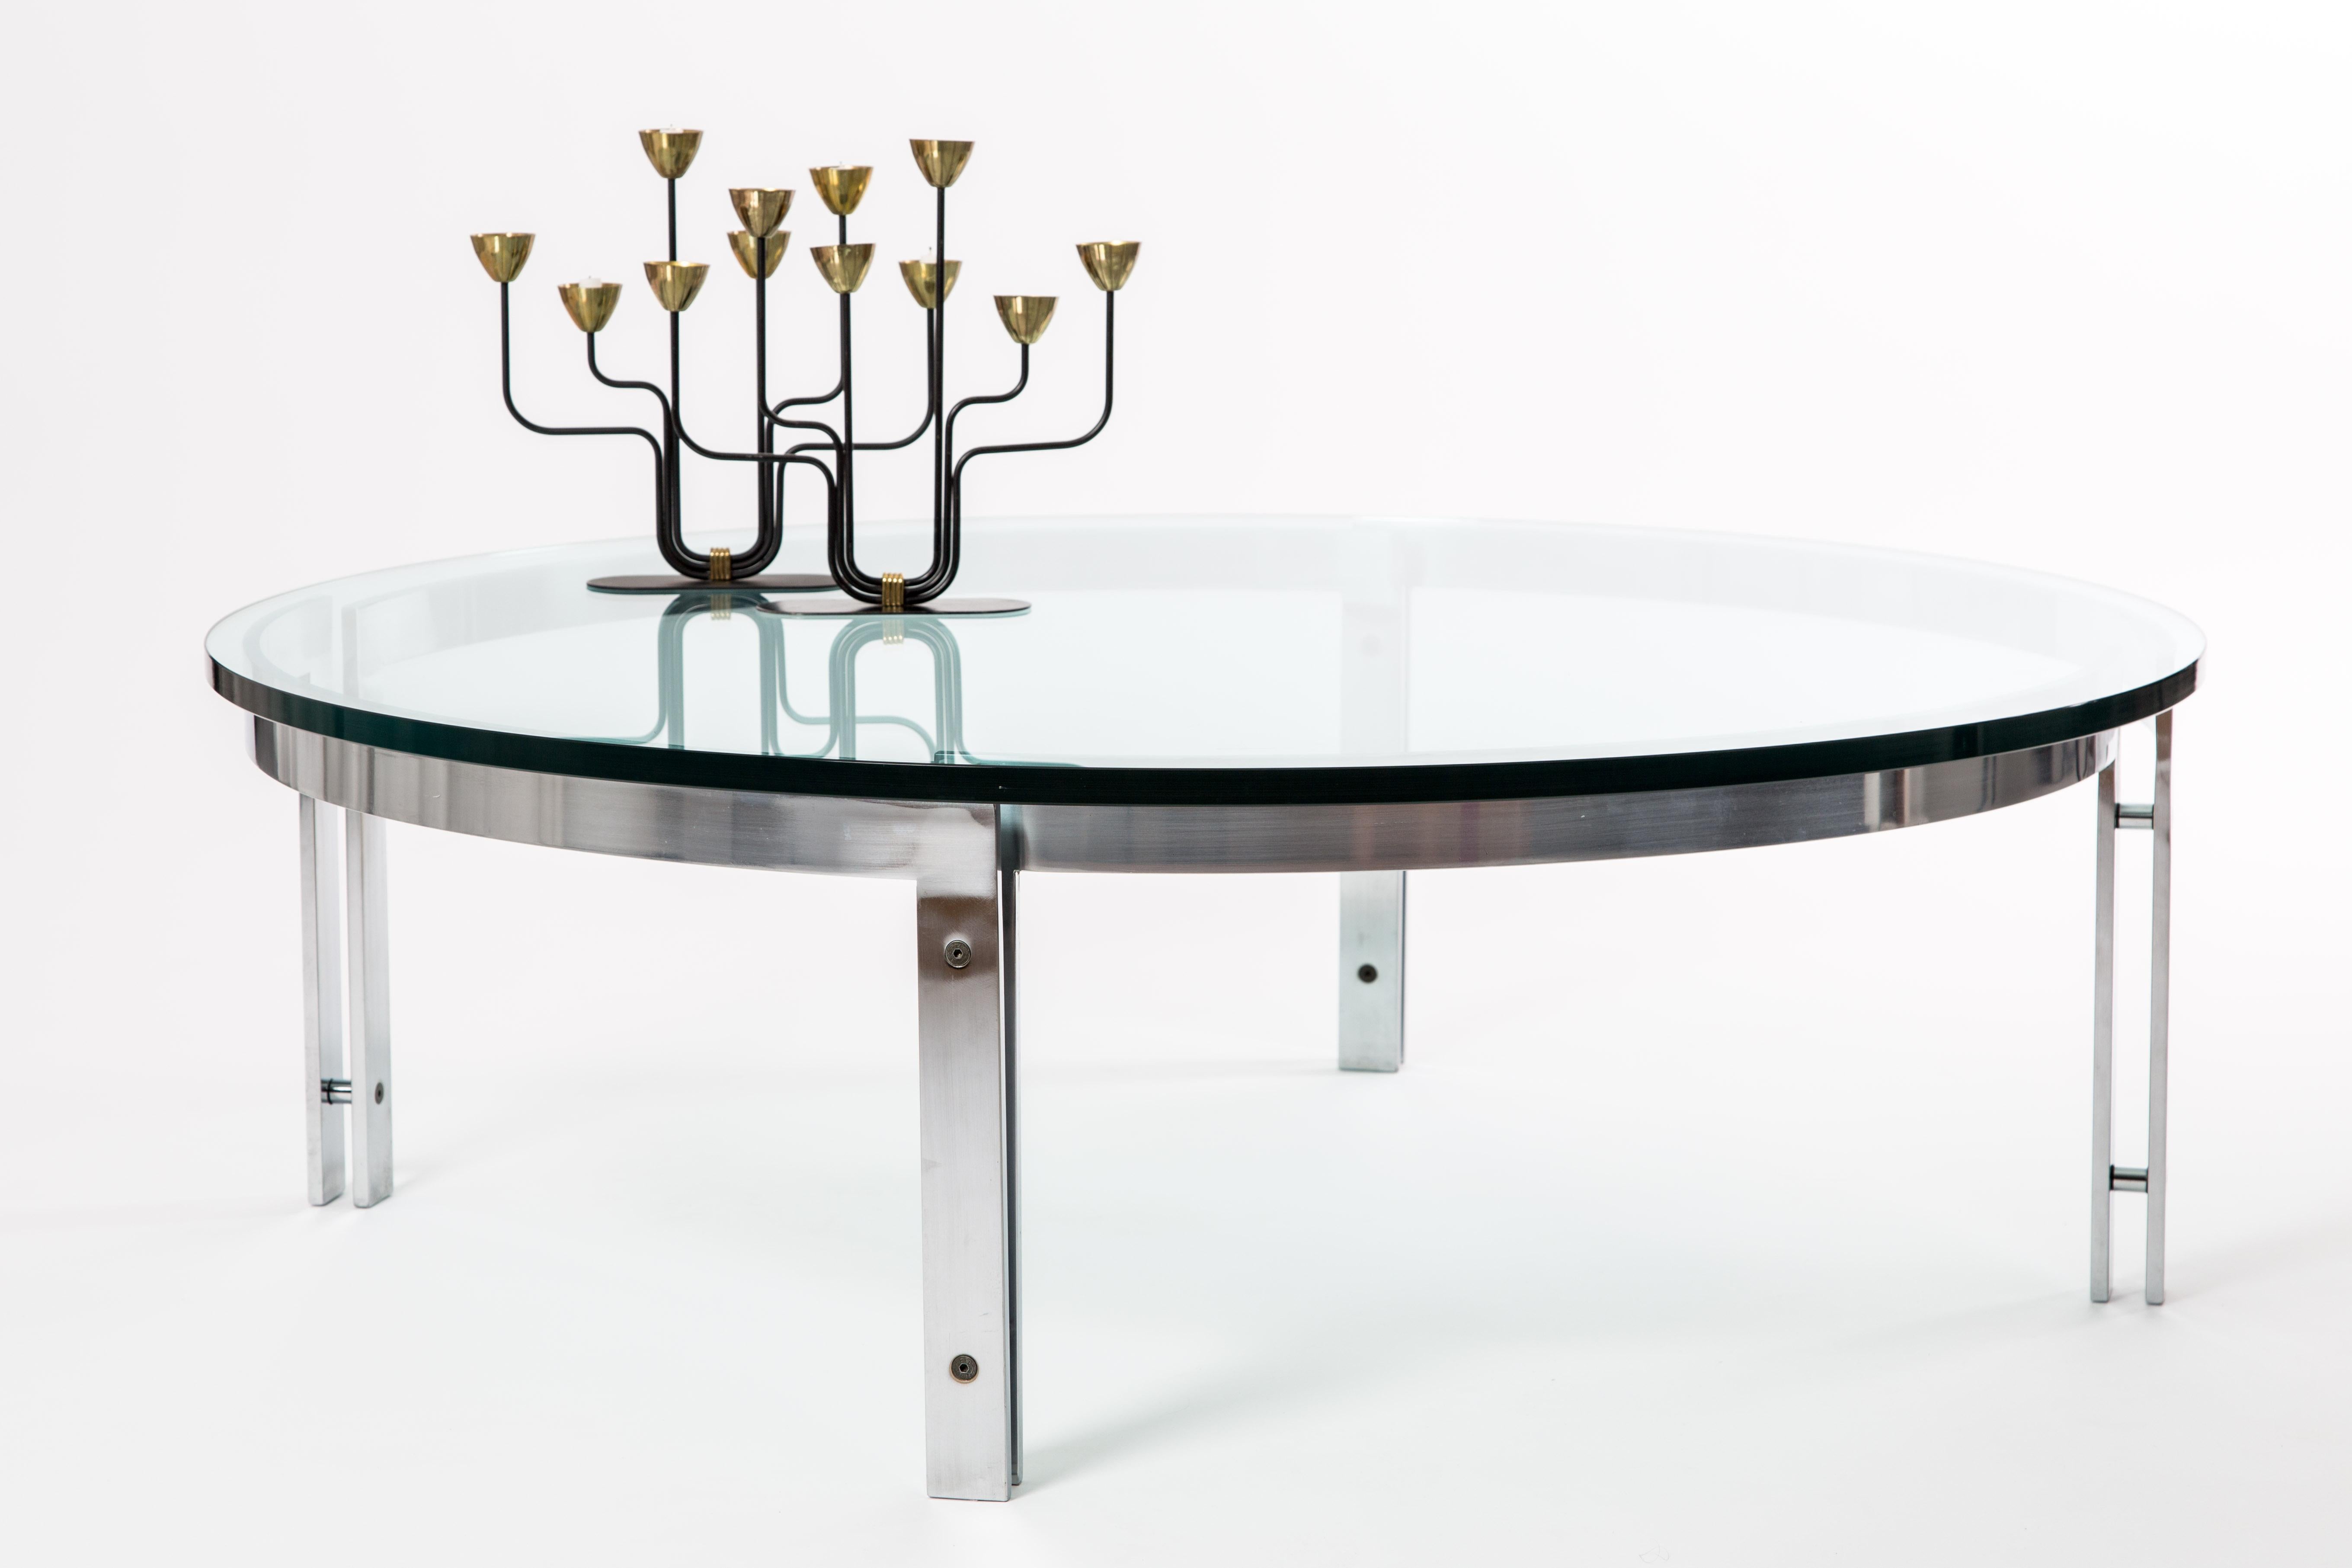 Metaform round glass table. Heavy solid top of 19 mm glass. Stainless steel frame with socket screws. High-tech construction.